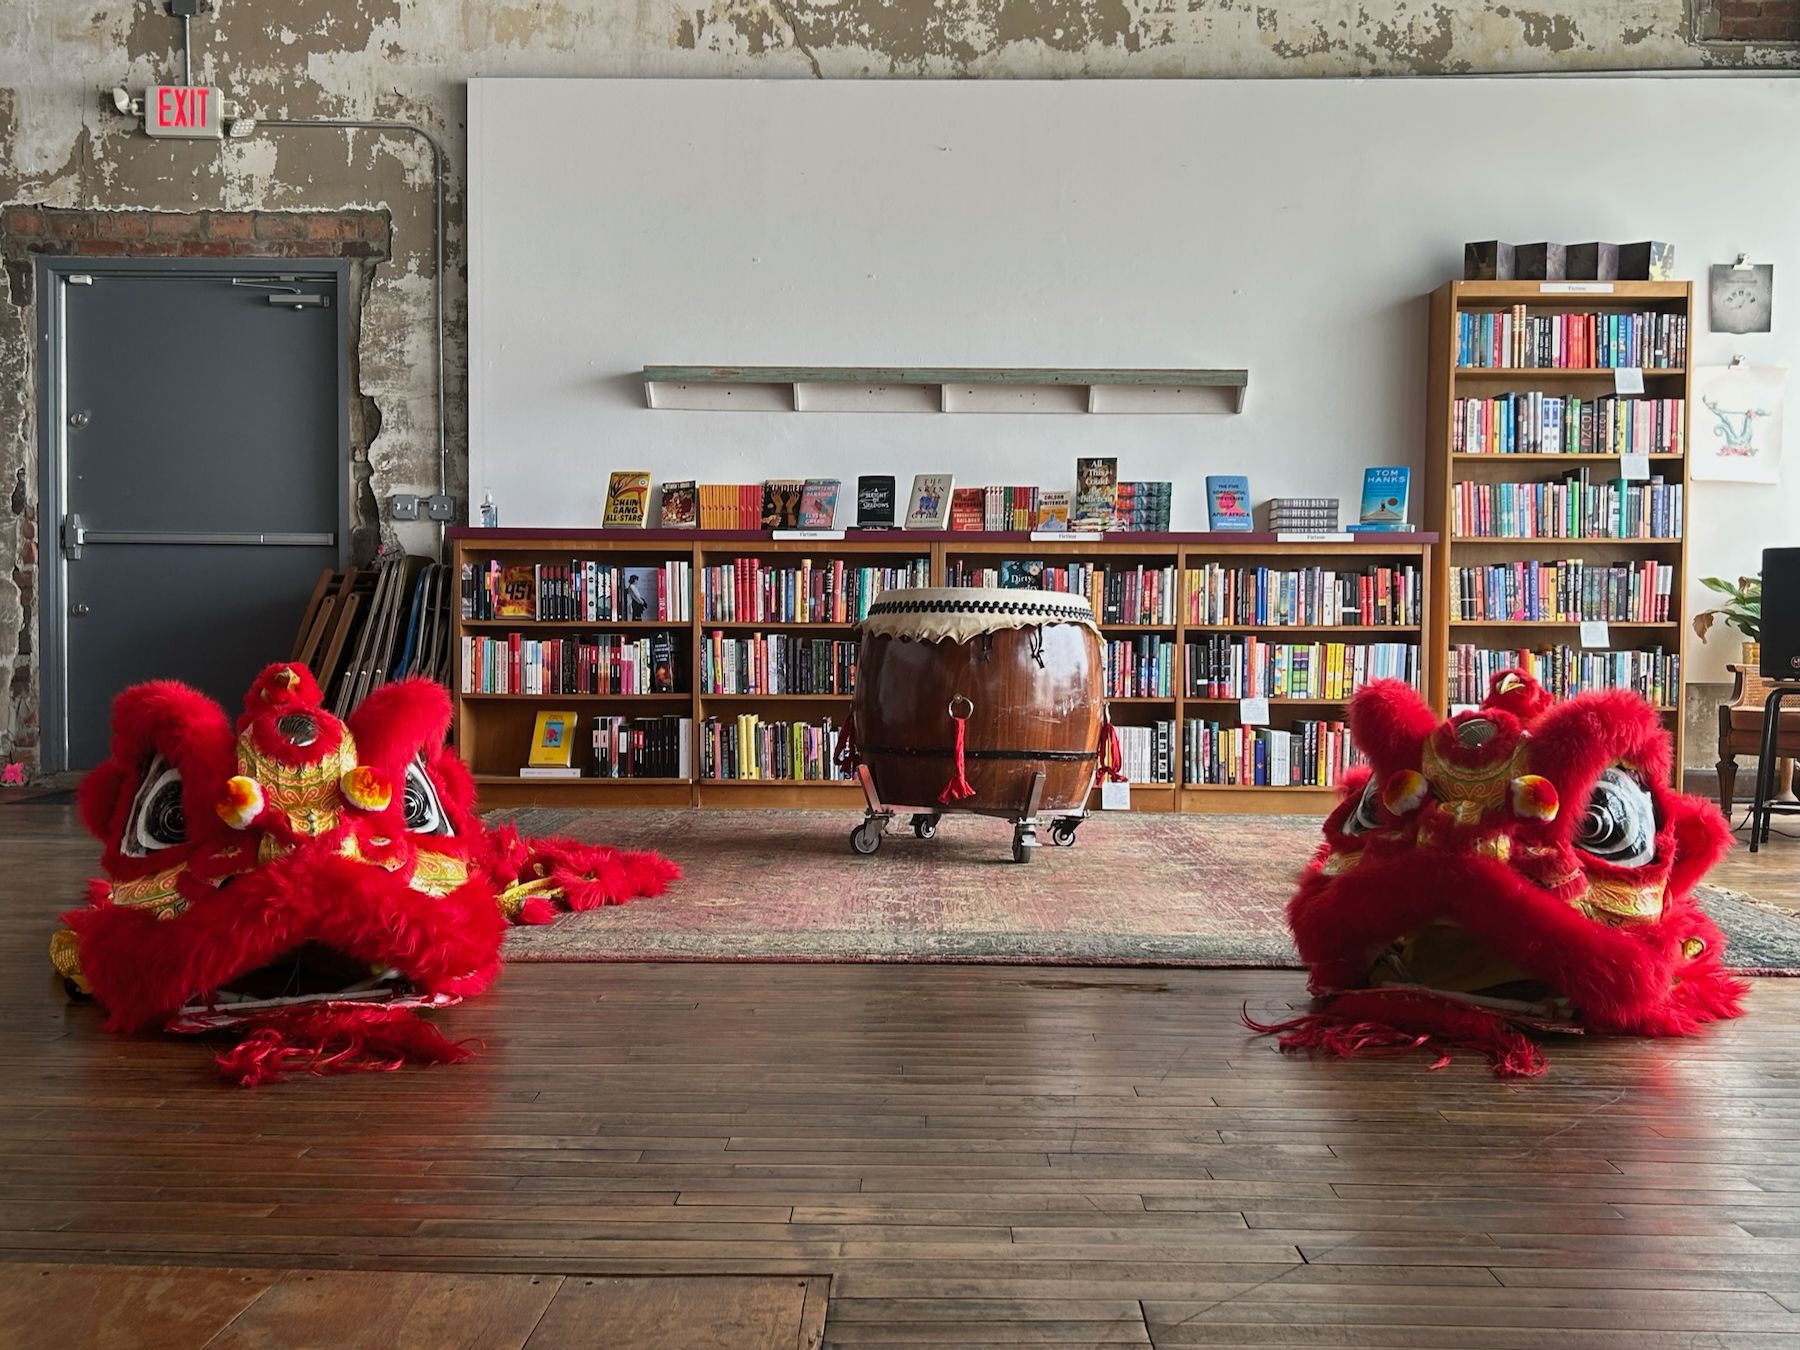 Two red lion mask heads and barrel drum awaiting performance in front of bookshelves.